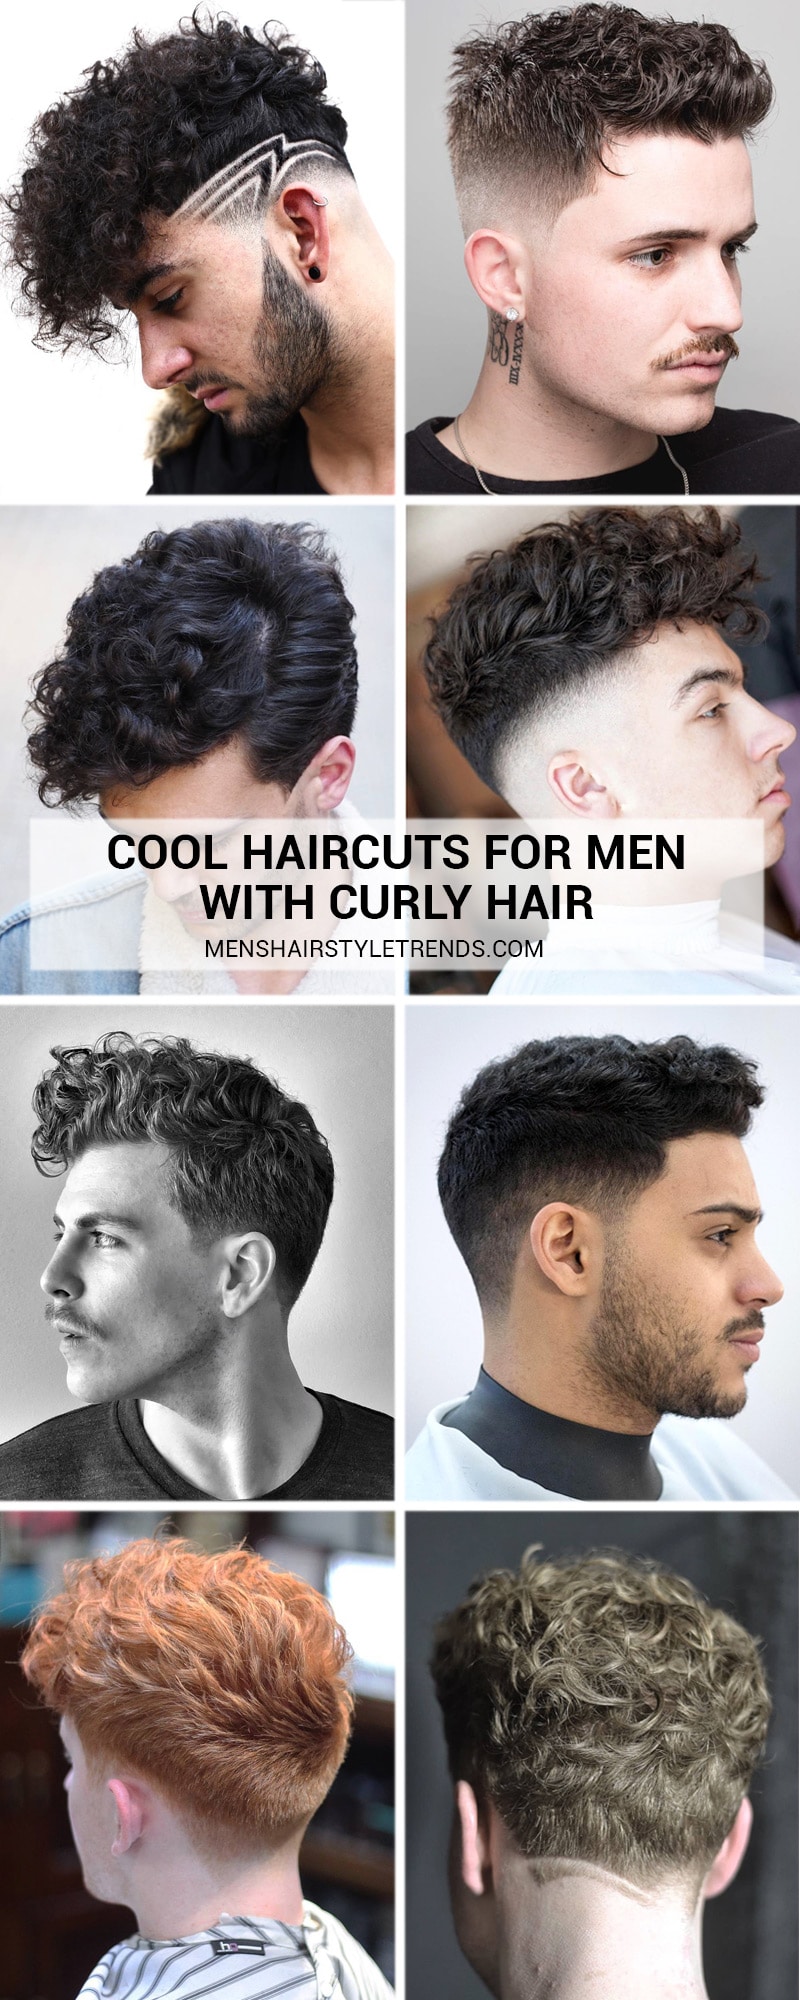 Curly Hair The Best Haircuts Hairstyles For Men 2020 Styles